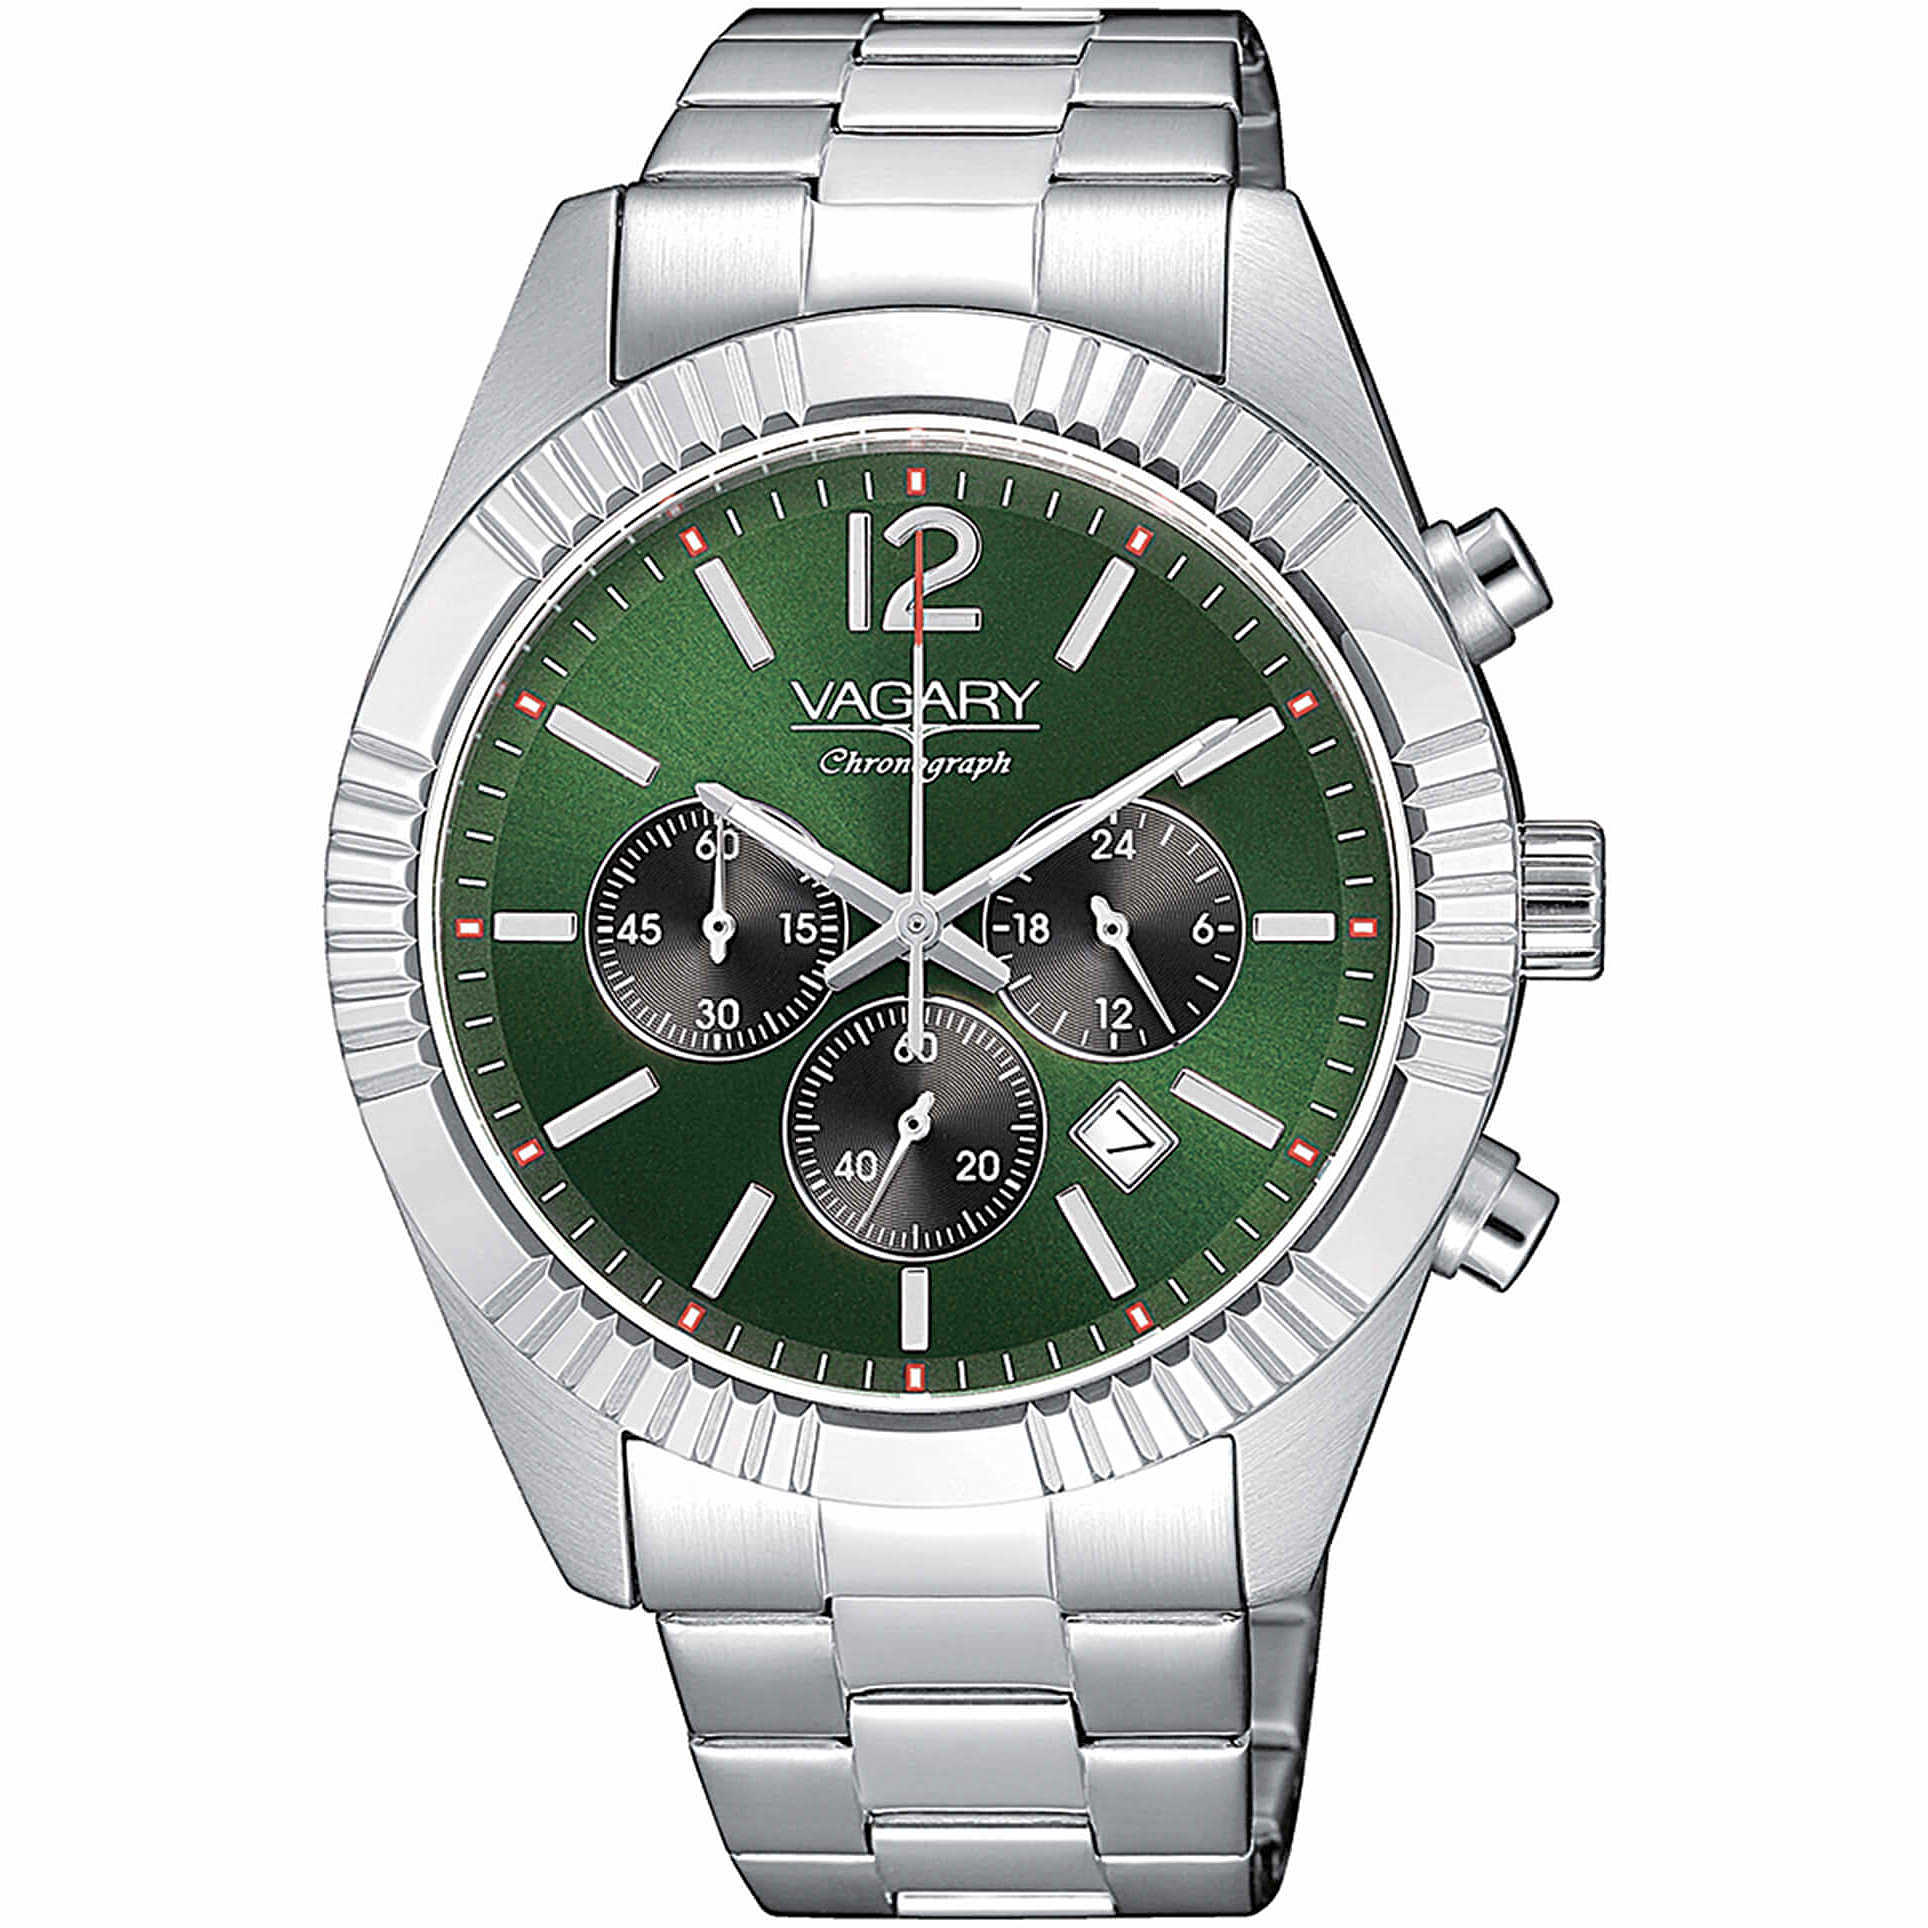 Vagary Watch by Citizen Timeless Gents IV4-519-41